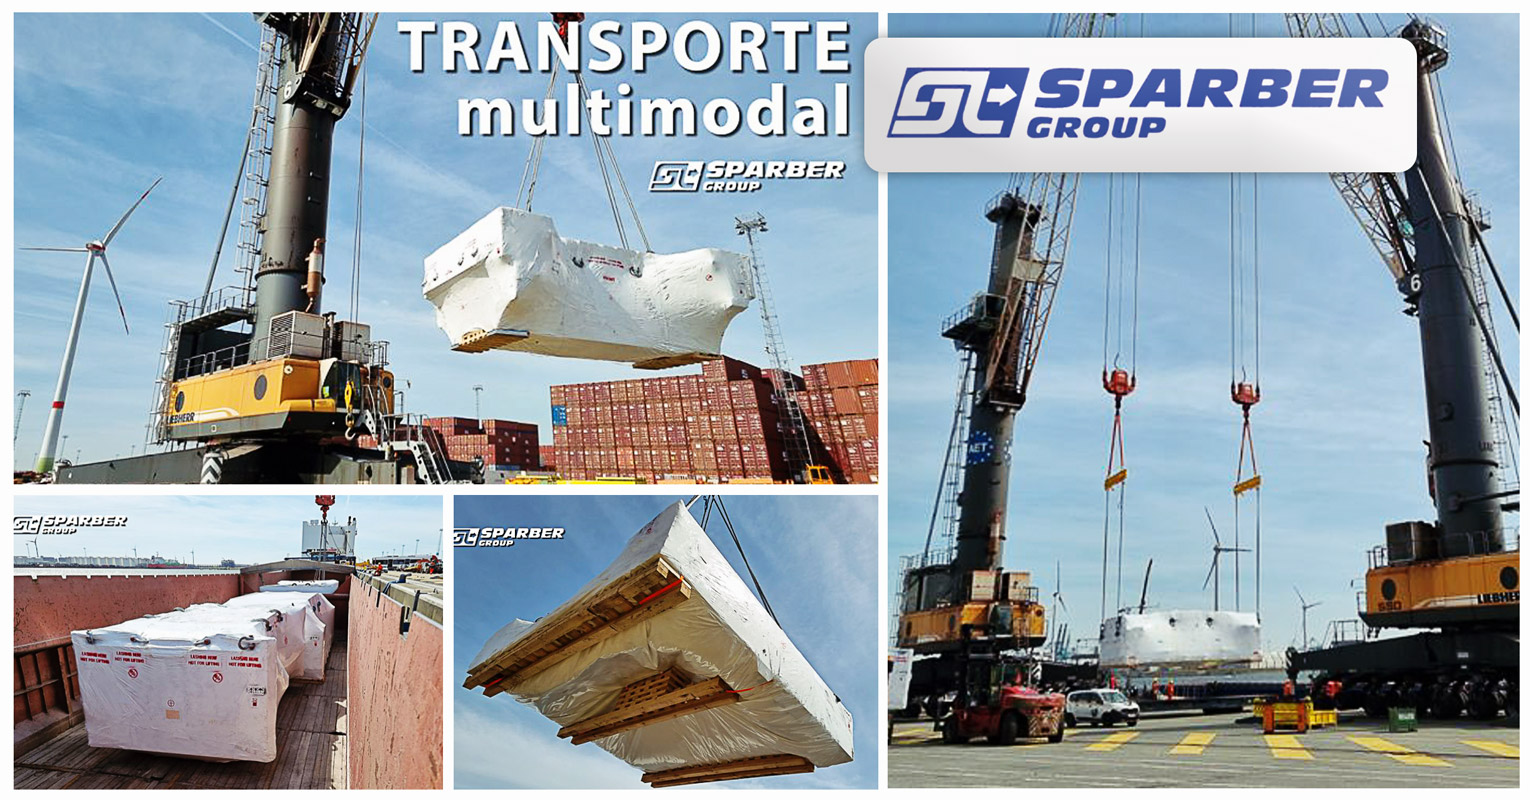 Sparber Group Performed a Three-piece Multimodal Transport Through Europe